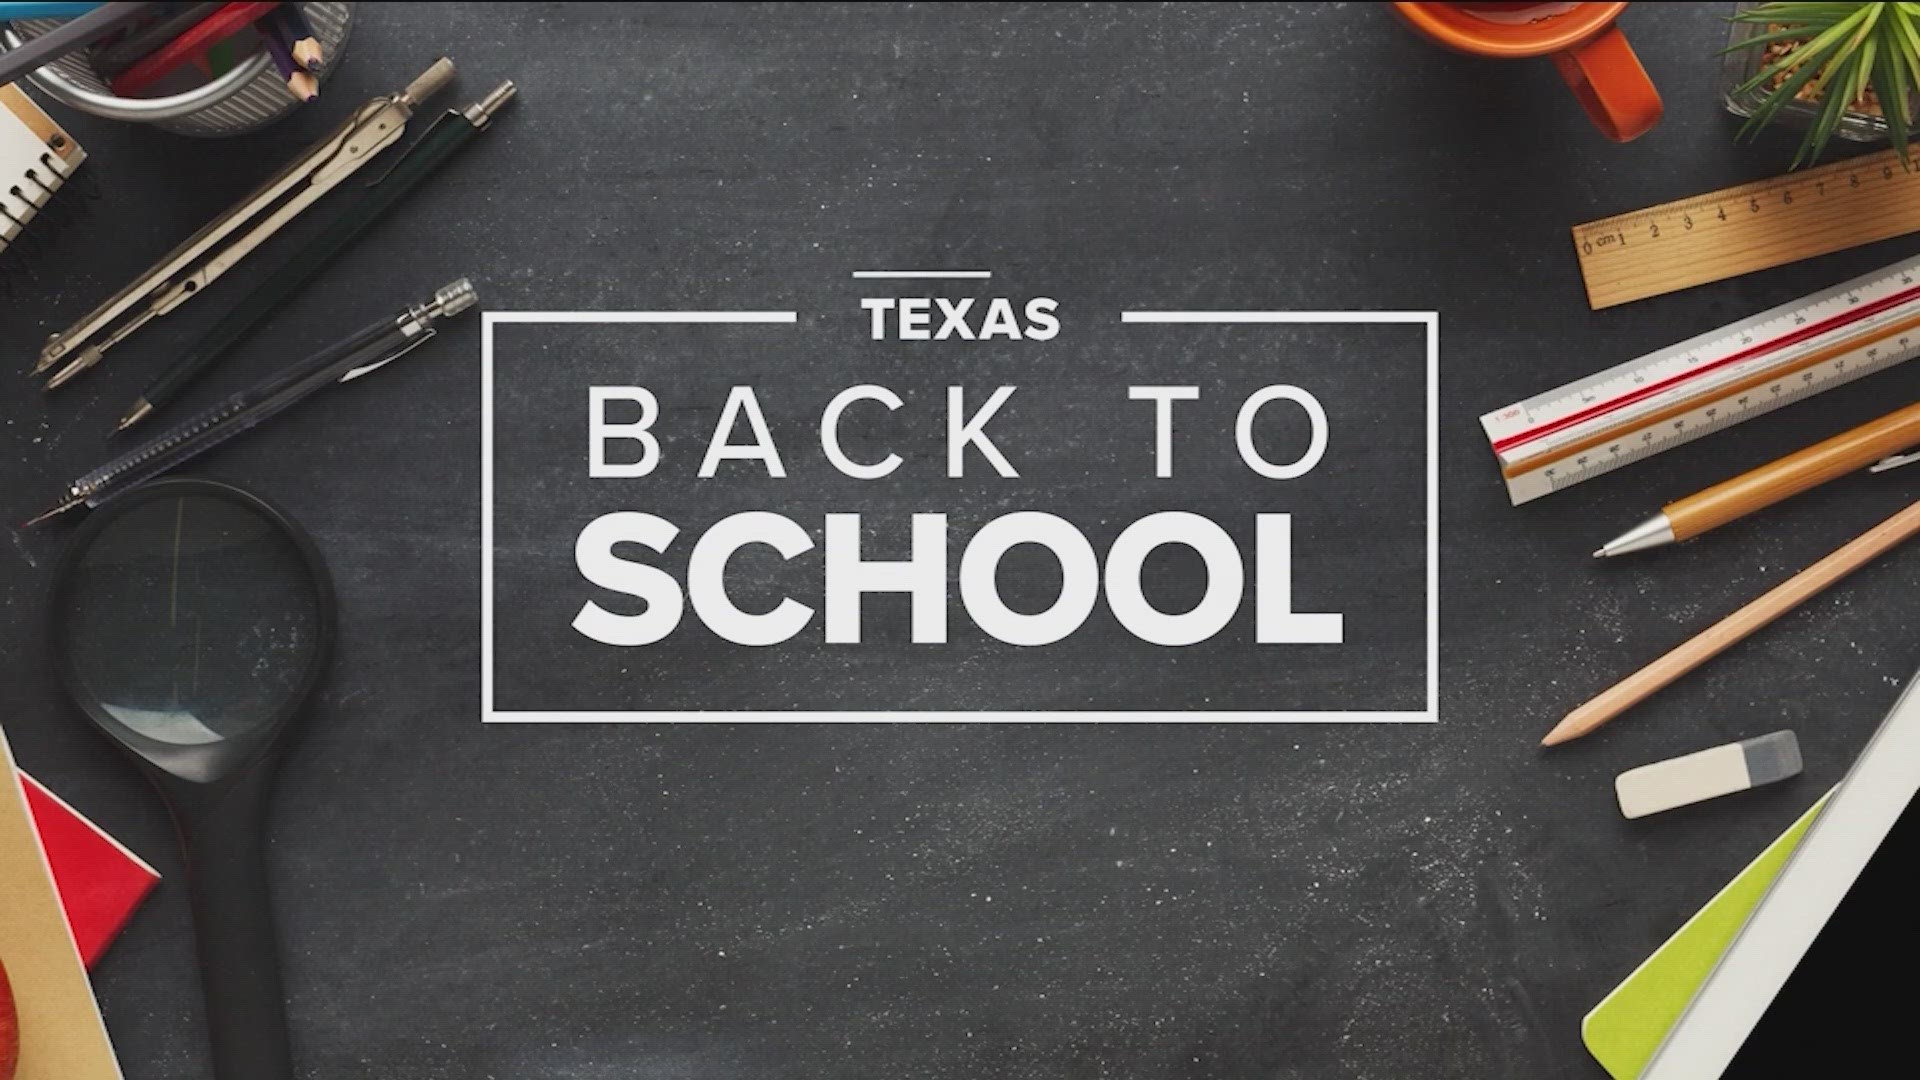 This weekend marks the last few days of summer for a lot of kids in Central Texas. But some districts are already on the clock, making sure students are ready.